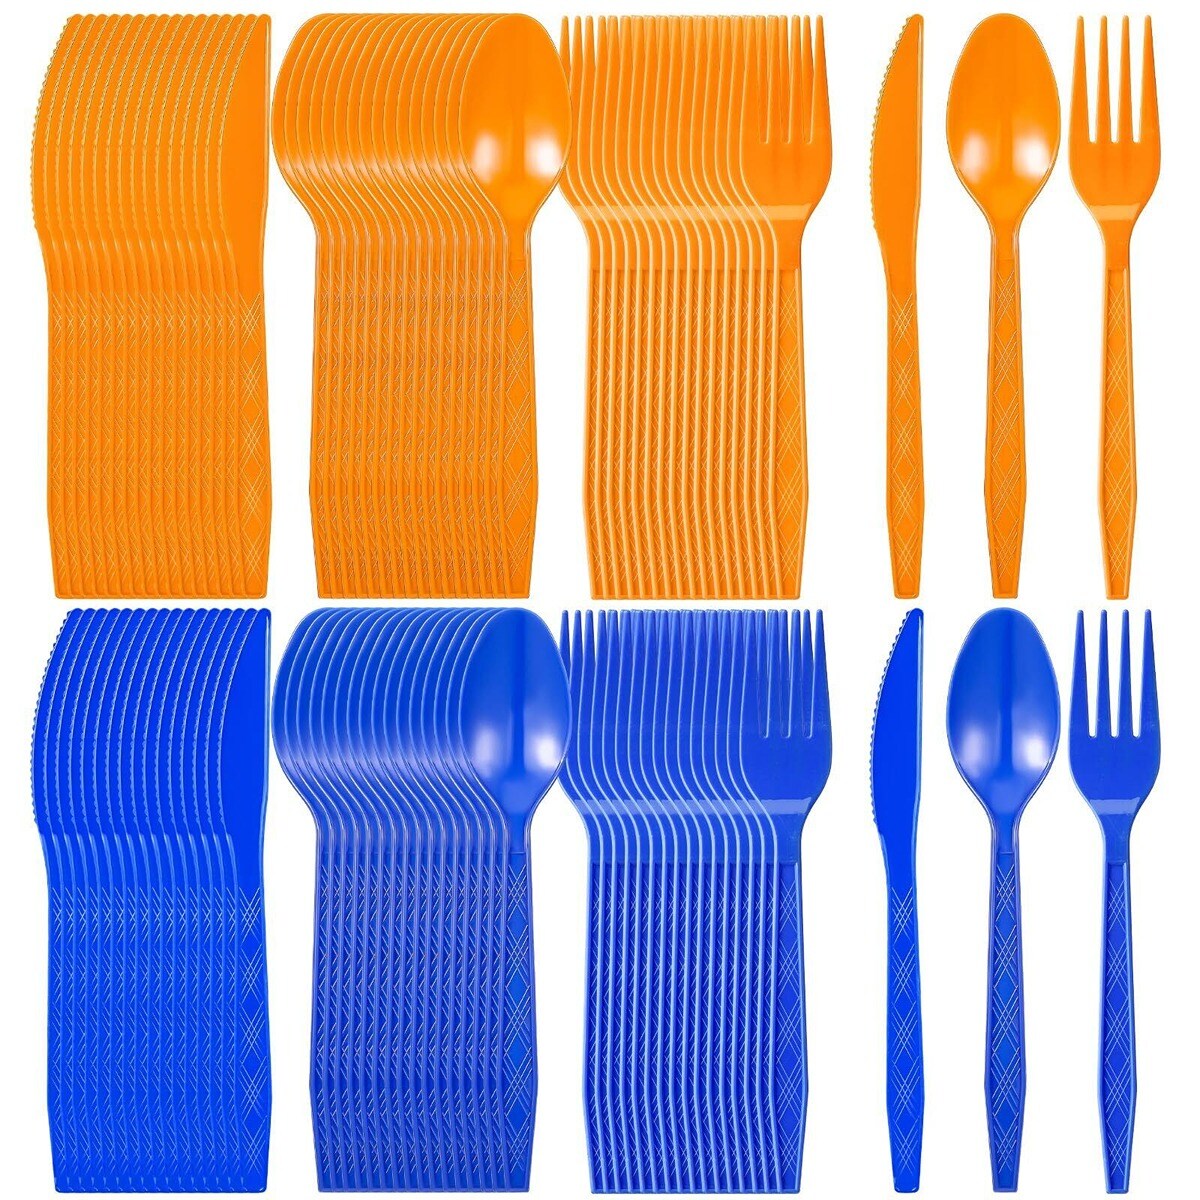 High-Quality Disposable Plastic Cutlery 150 pcs